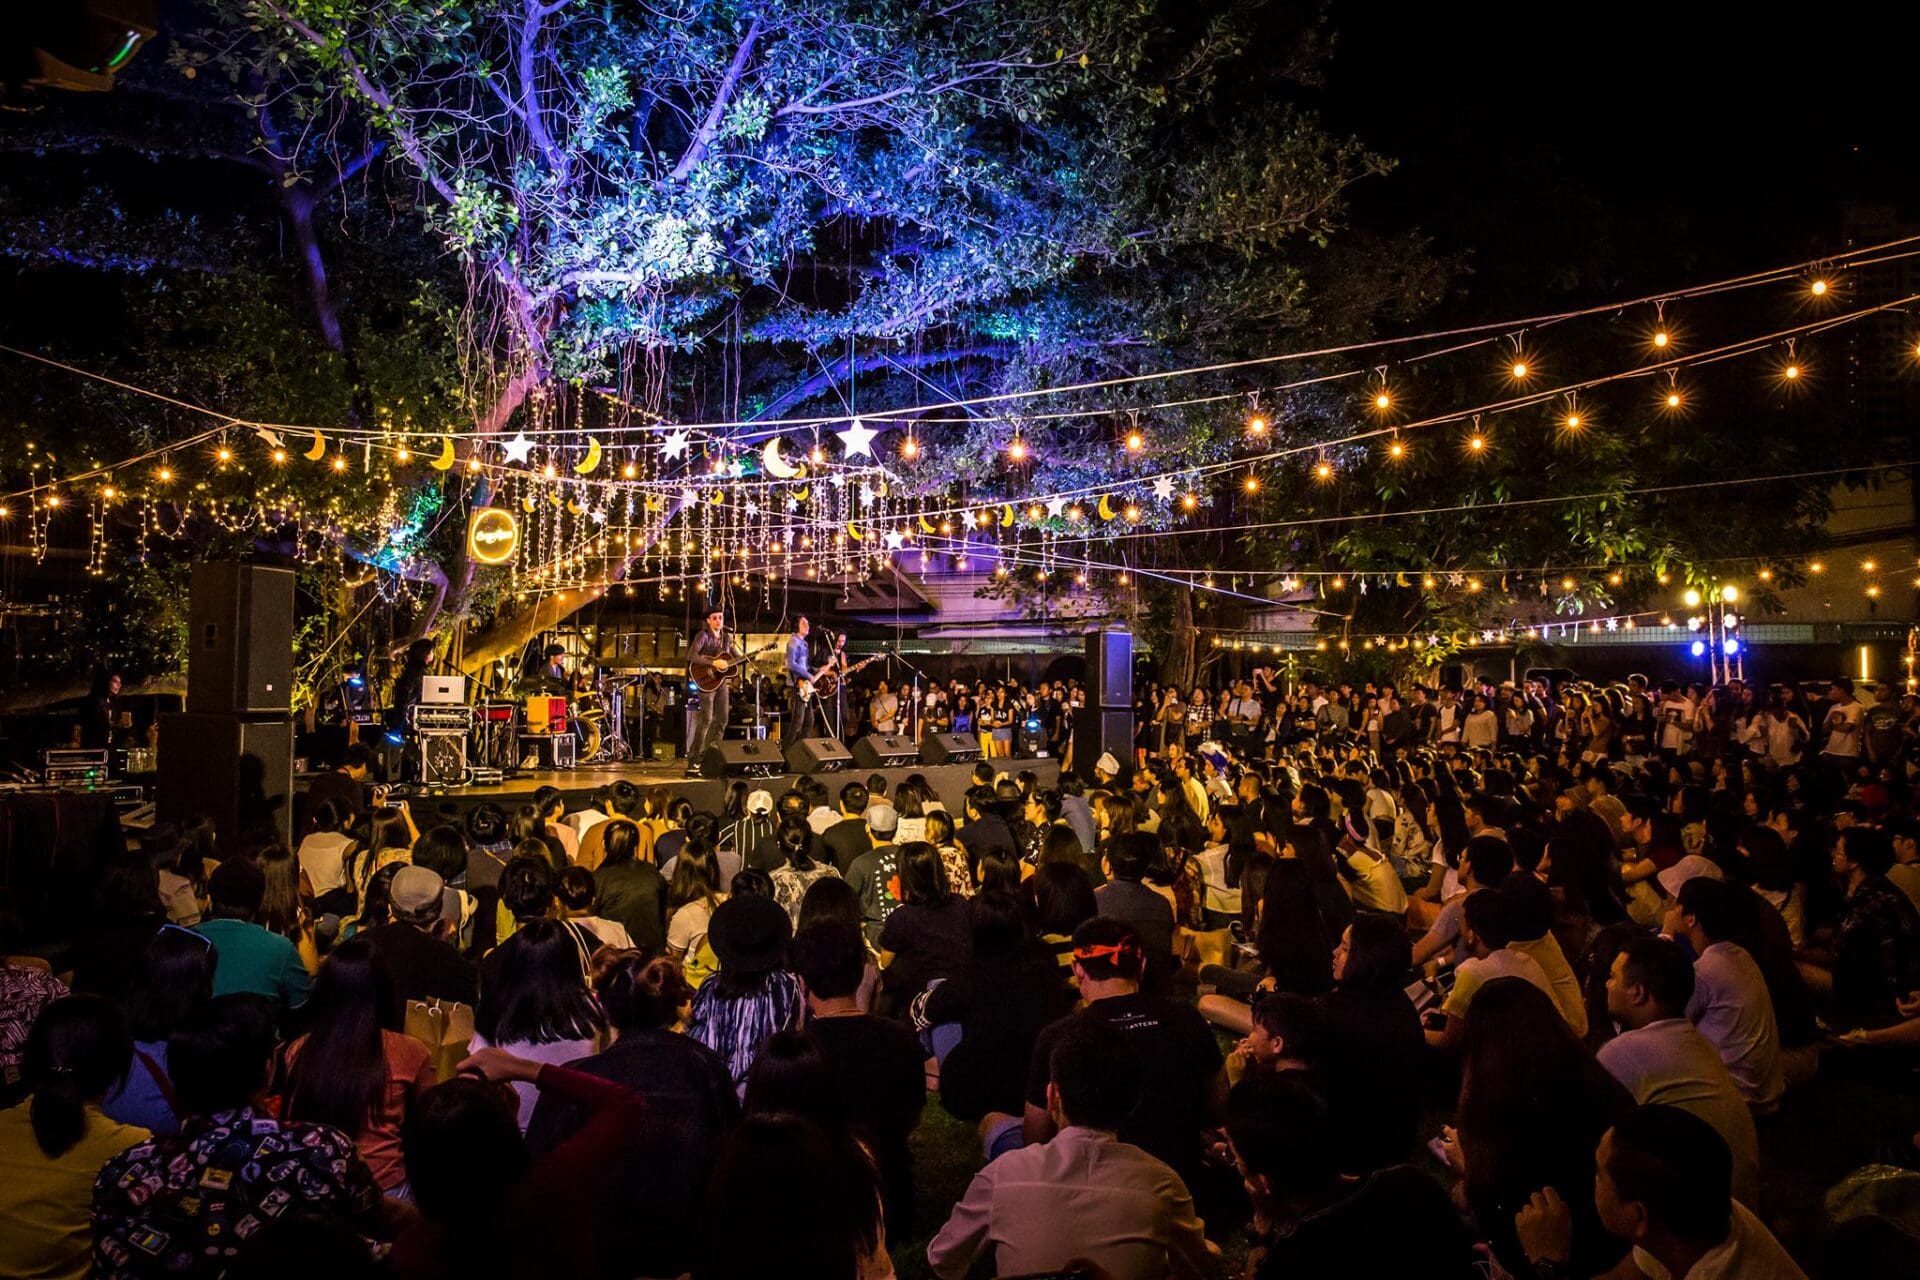 The best galleries and museums in Bangkok | a view of a big crowd, sat cross-legged on the floor, watching a band play on a stage below a tree at night. The tree is lit up from below, and rows of bulbs run from the tree and across the audience